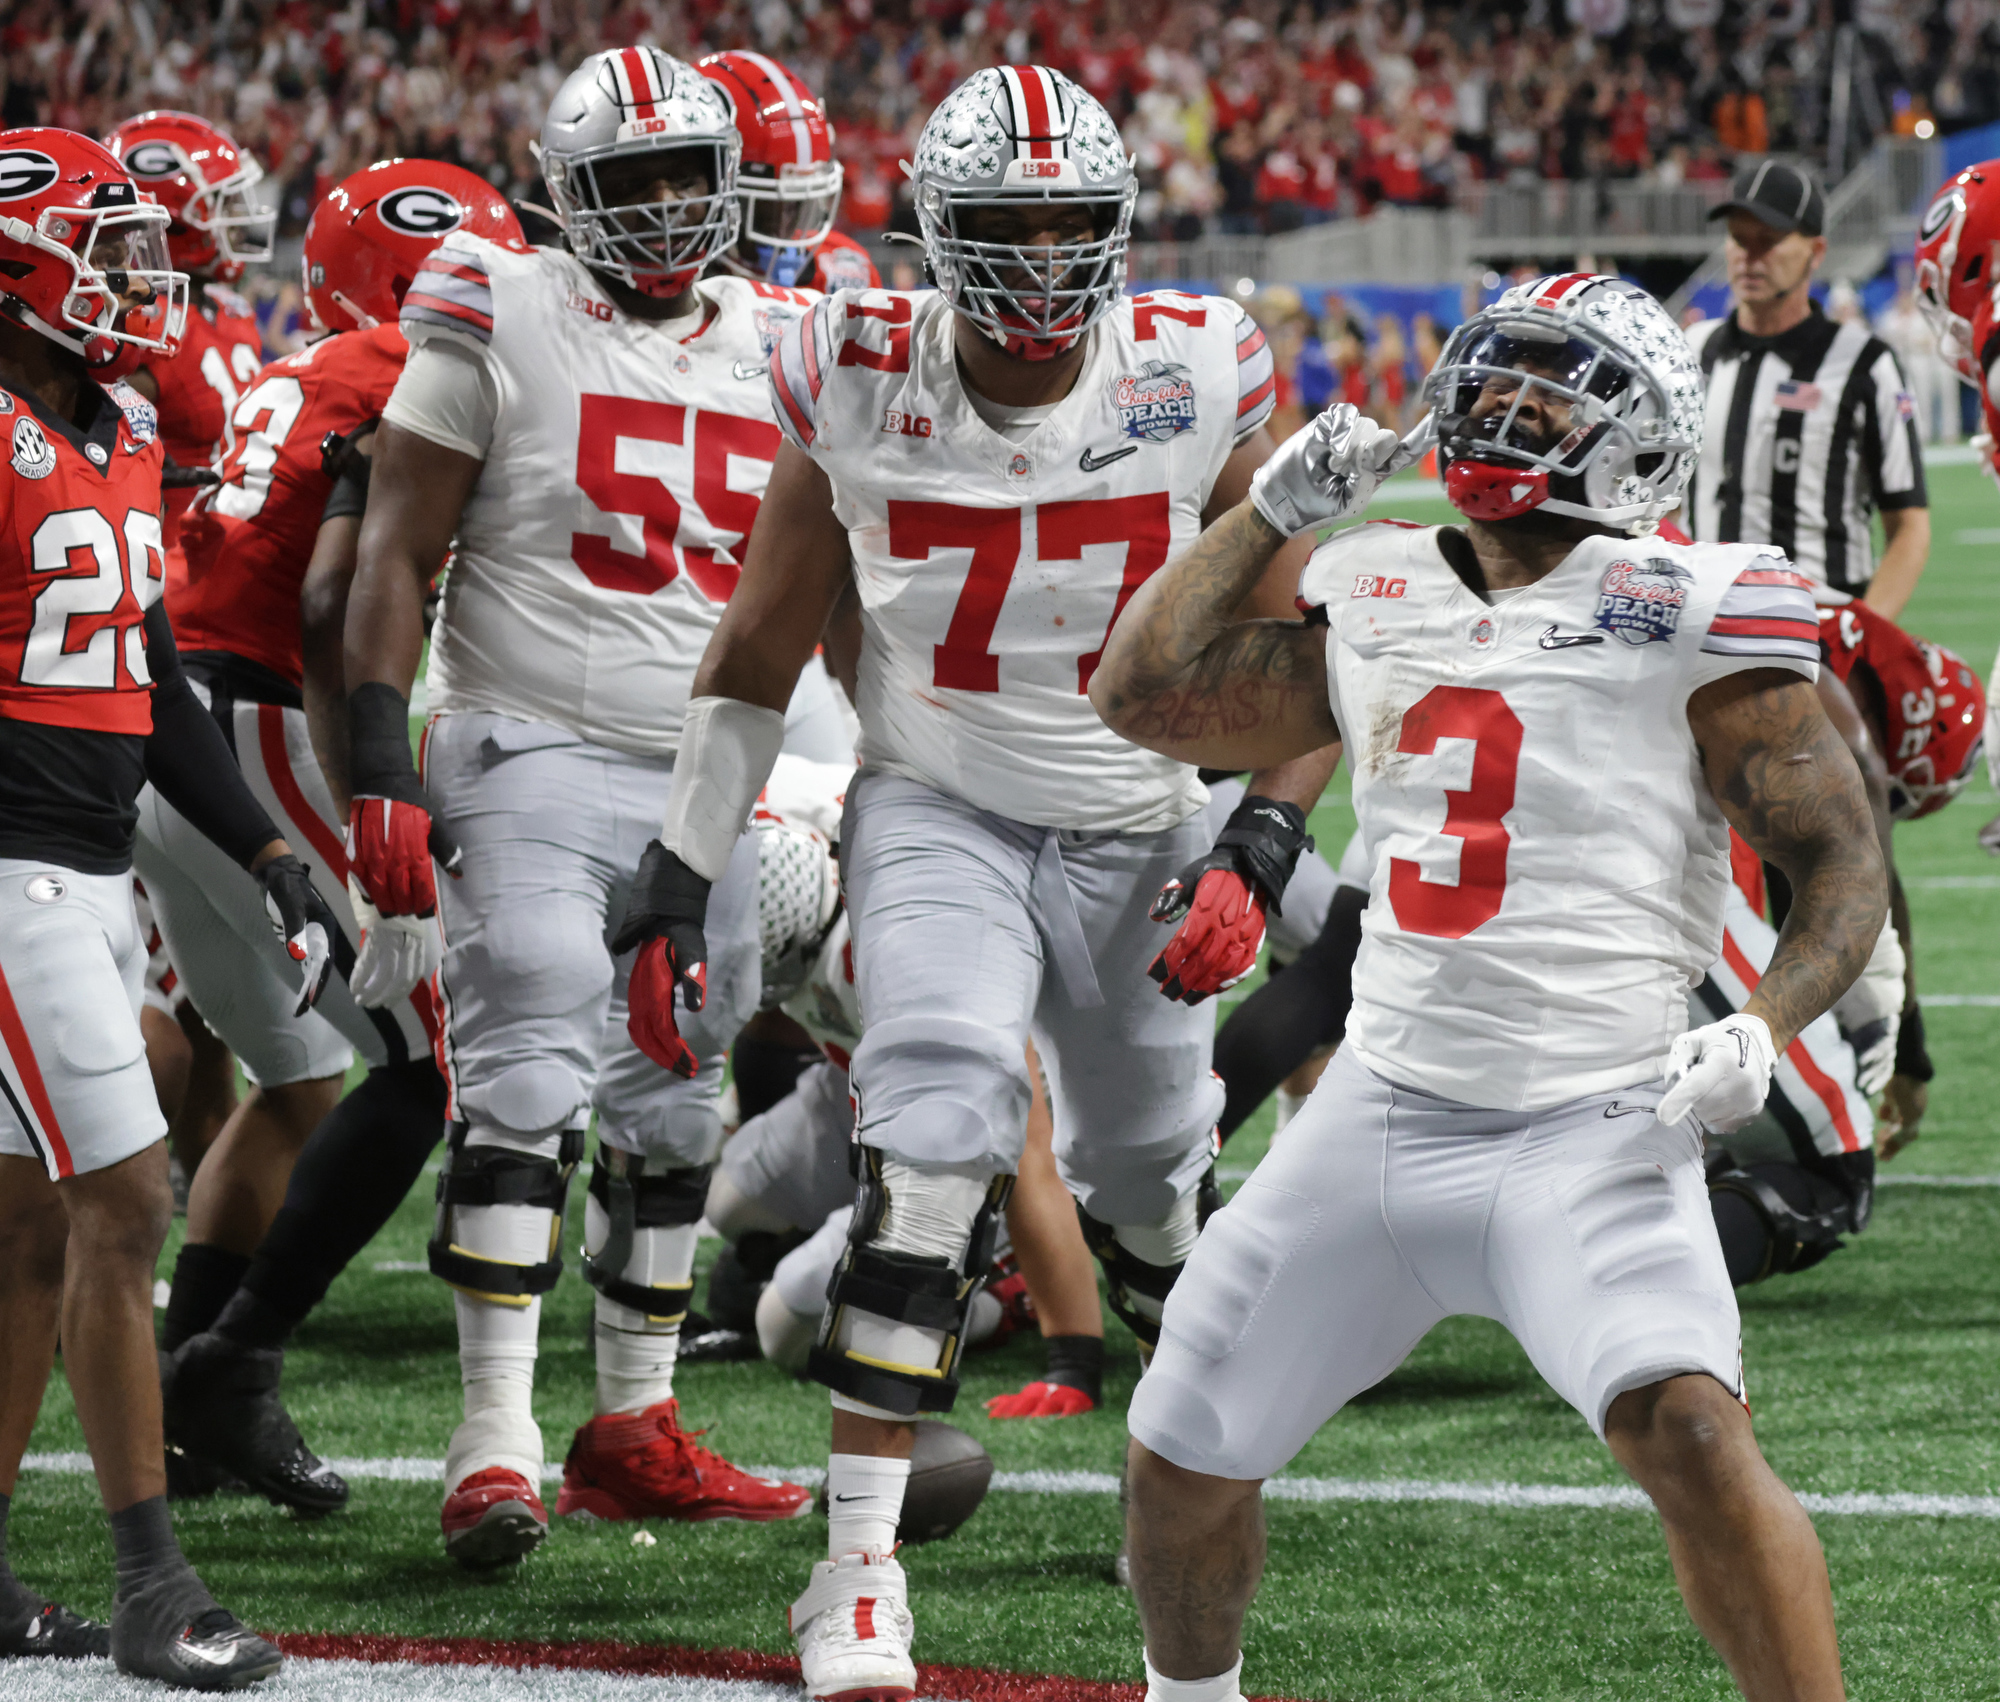 Ohio State football player Harry Miller says he's retiring